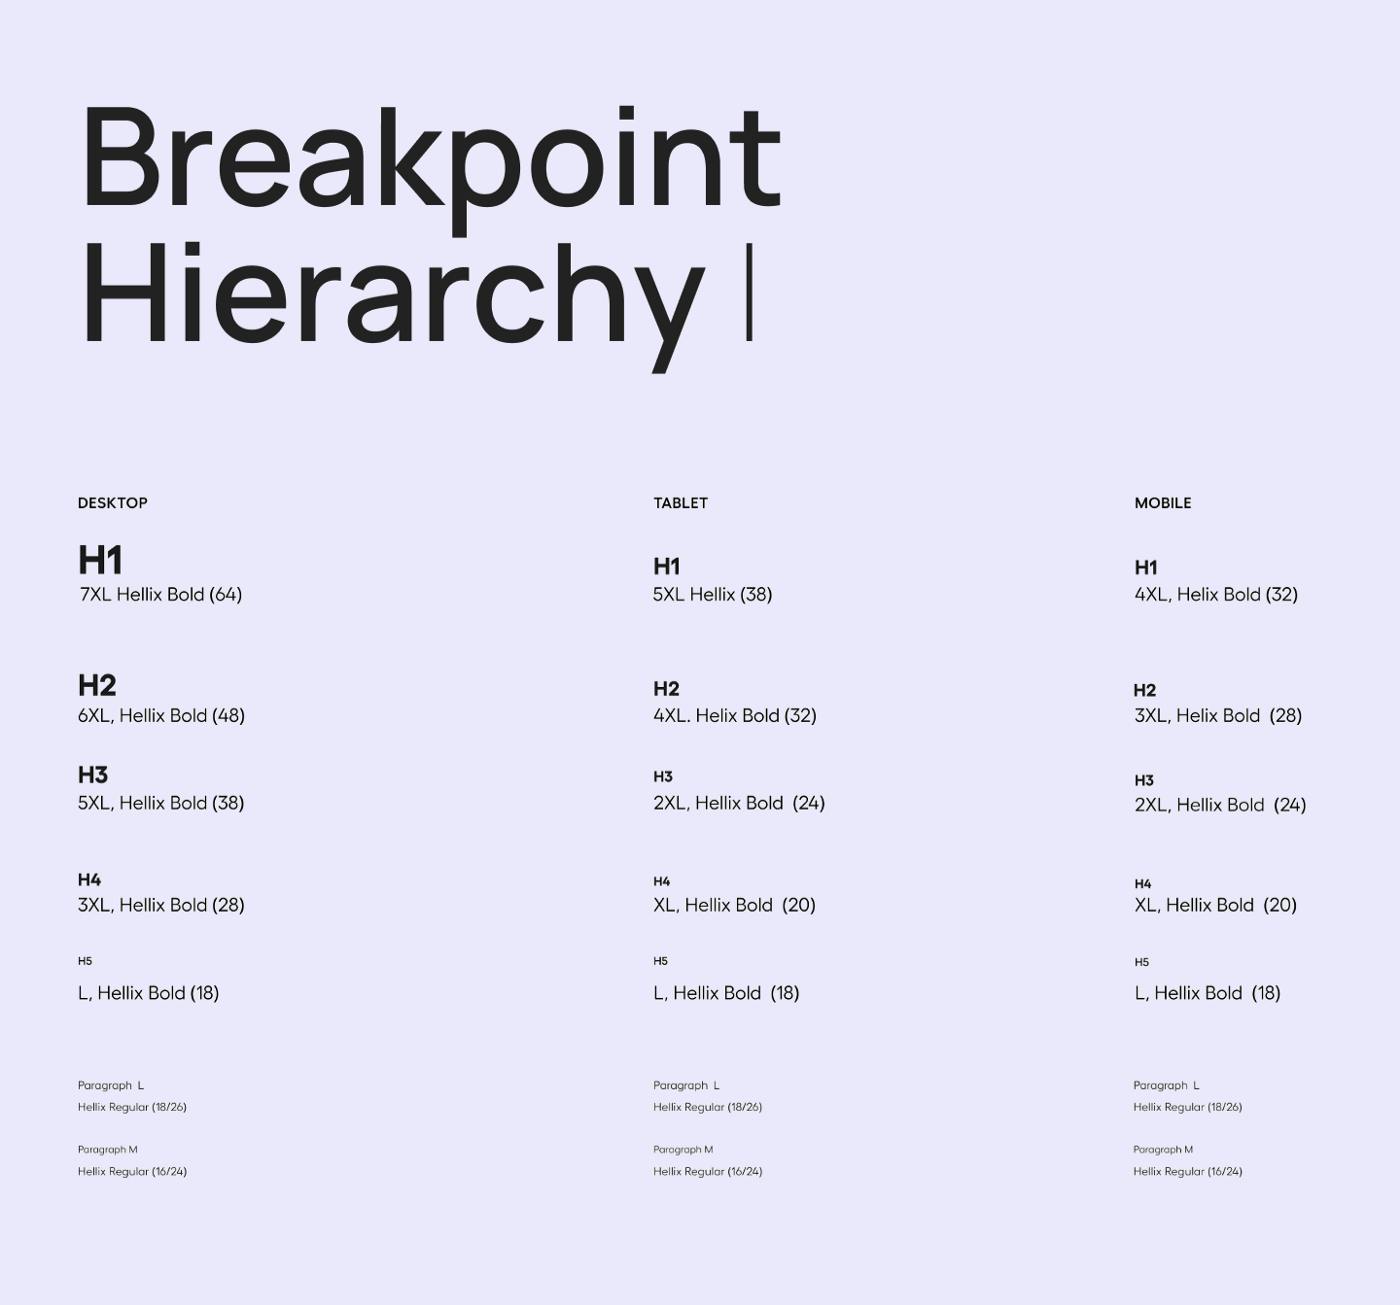 Breakpoint hierarchy.